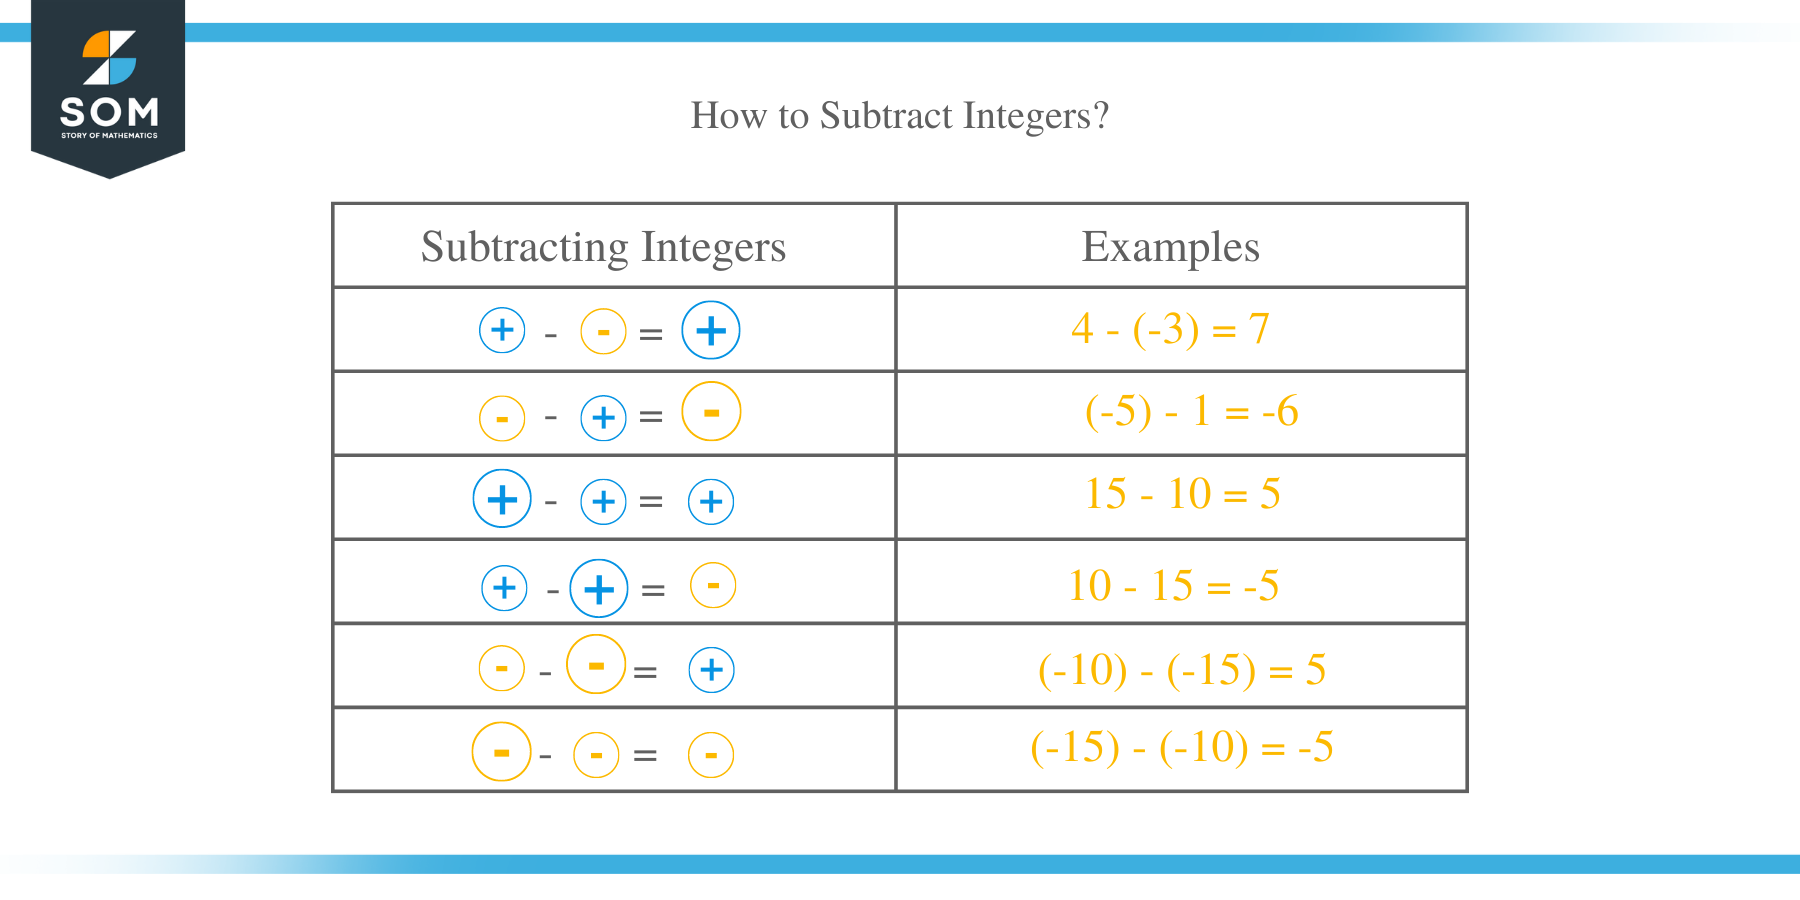 How to Subtract Integers?